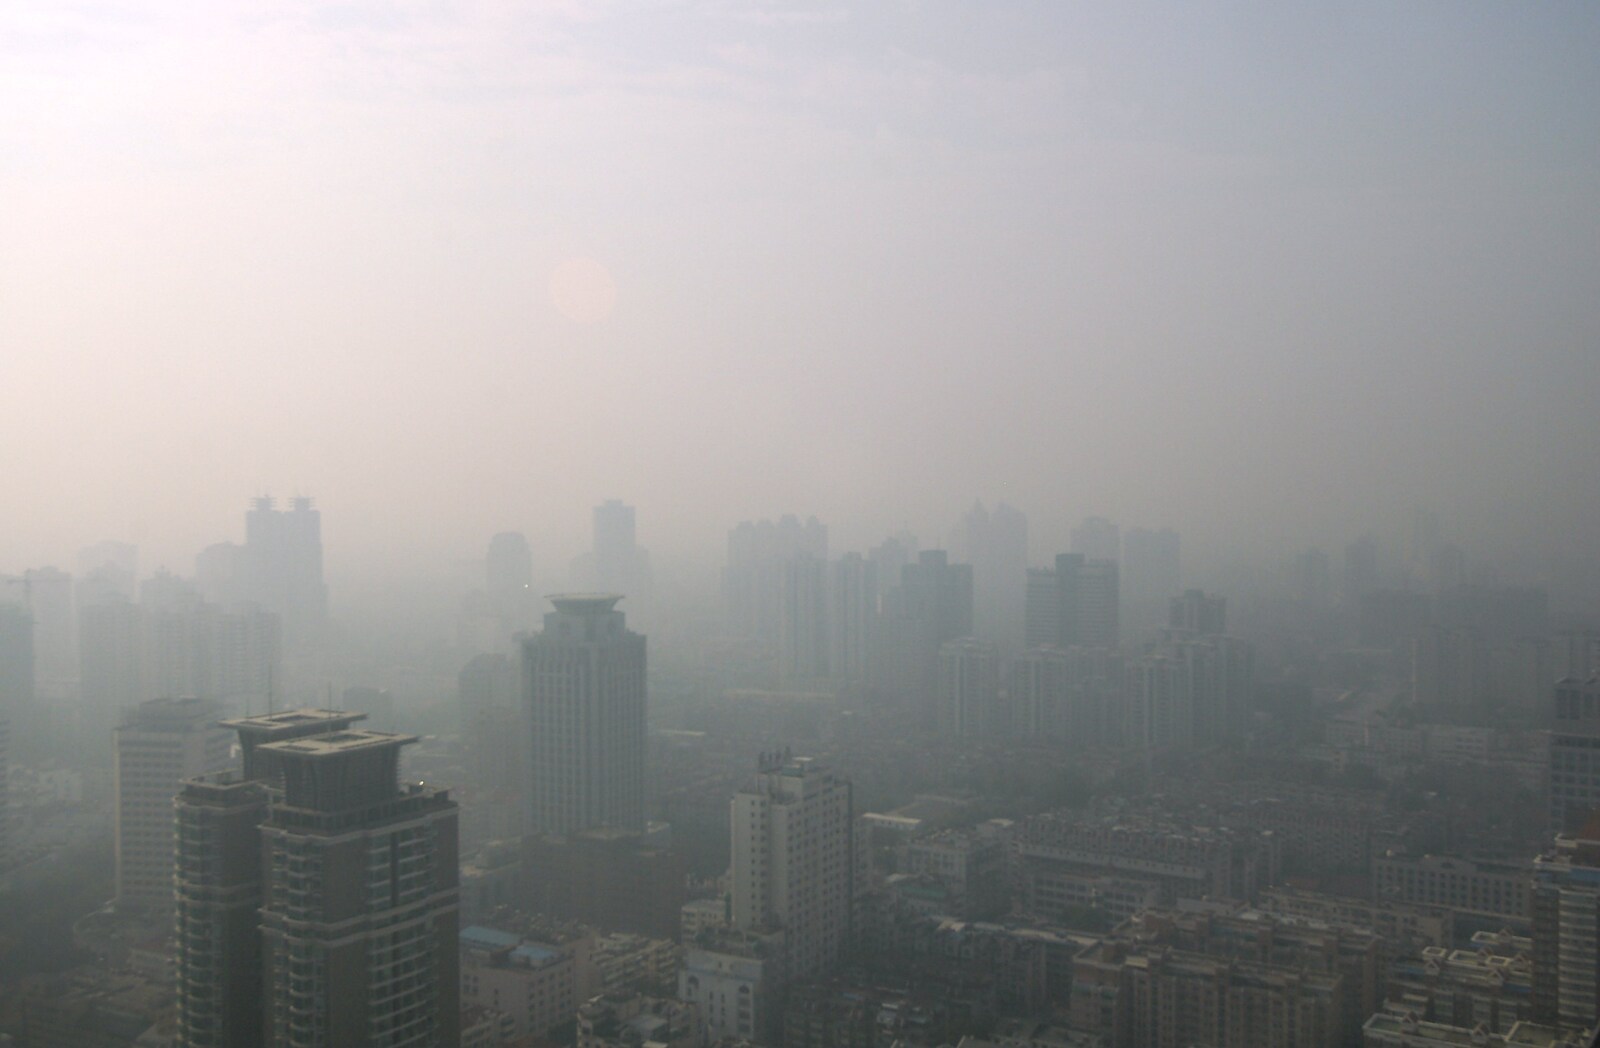 A smoggy city view on the first morning from A Few Days in Nanjing, Jiangsu Province, China - 7th October 2006